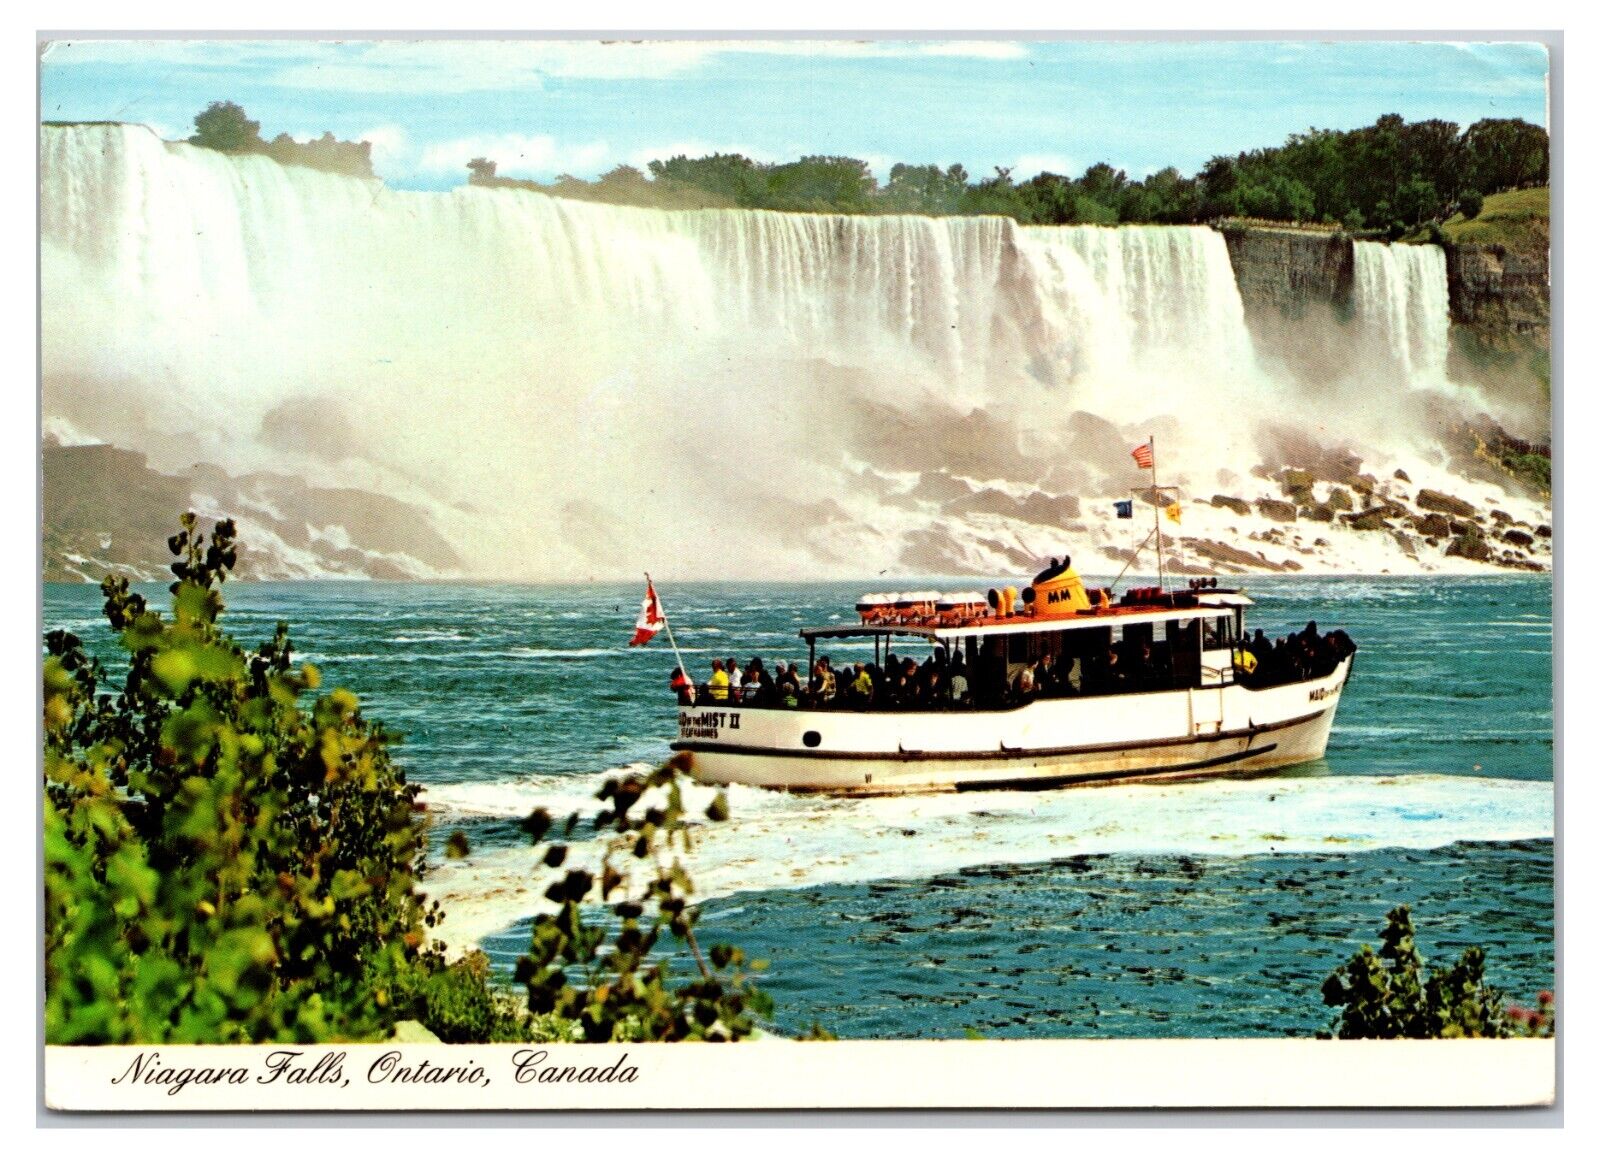 VTG 1980s - Maid of The Mist Boat - Niagara Falls, Canada Postcard (Posted 1983)